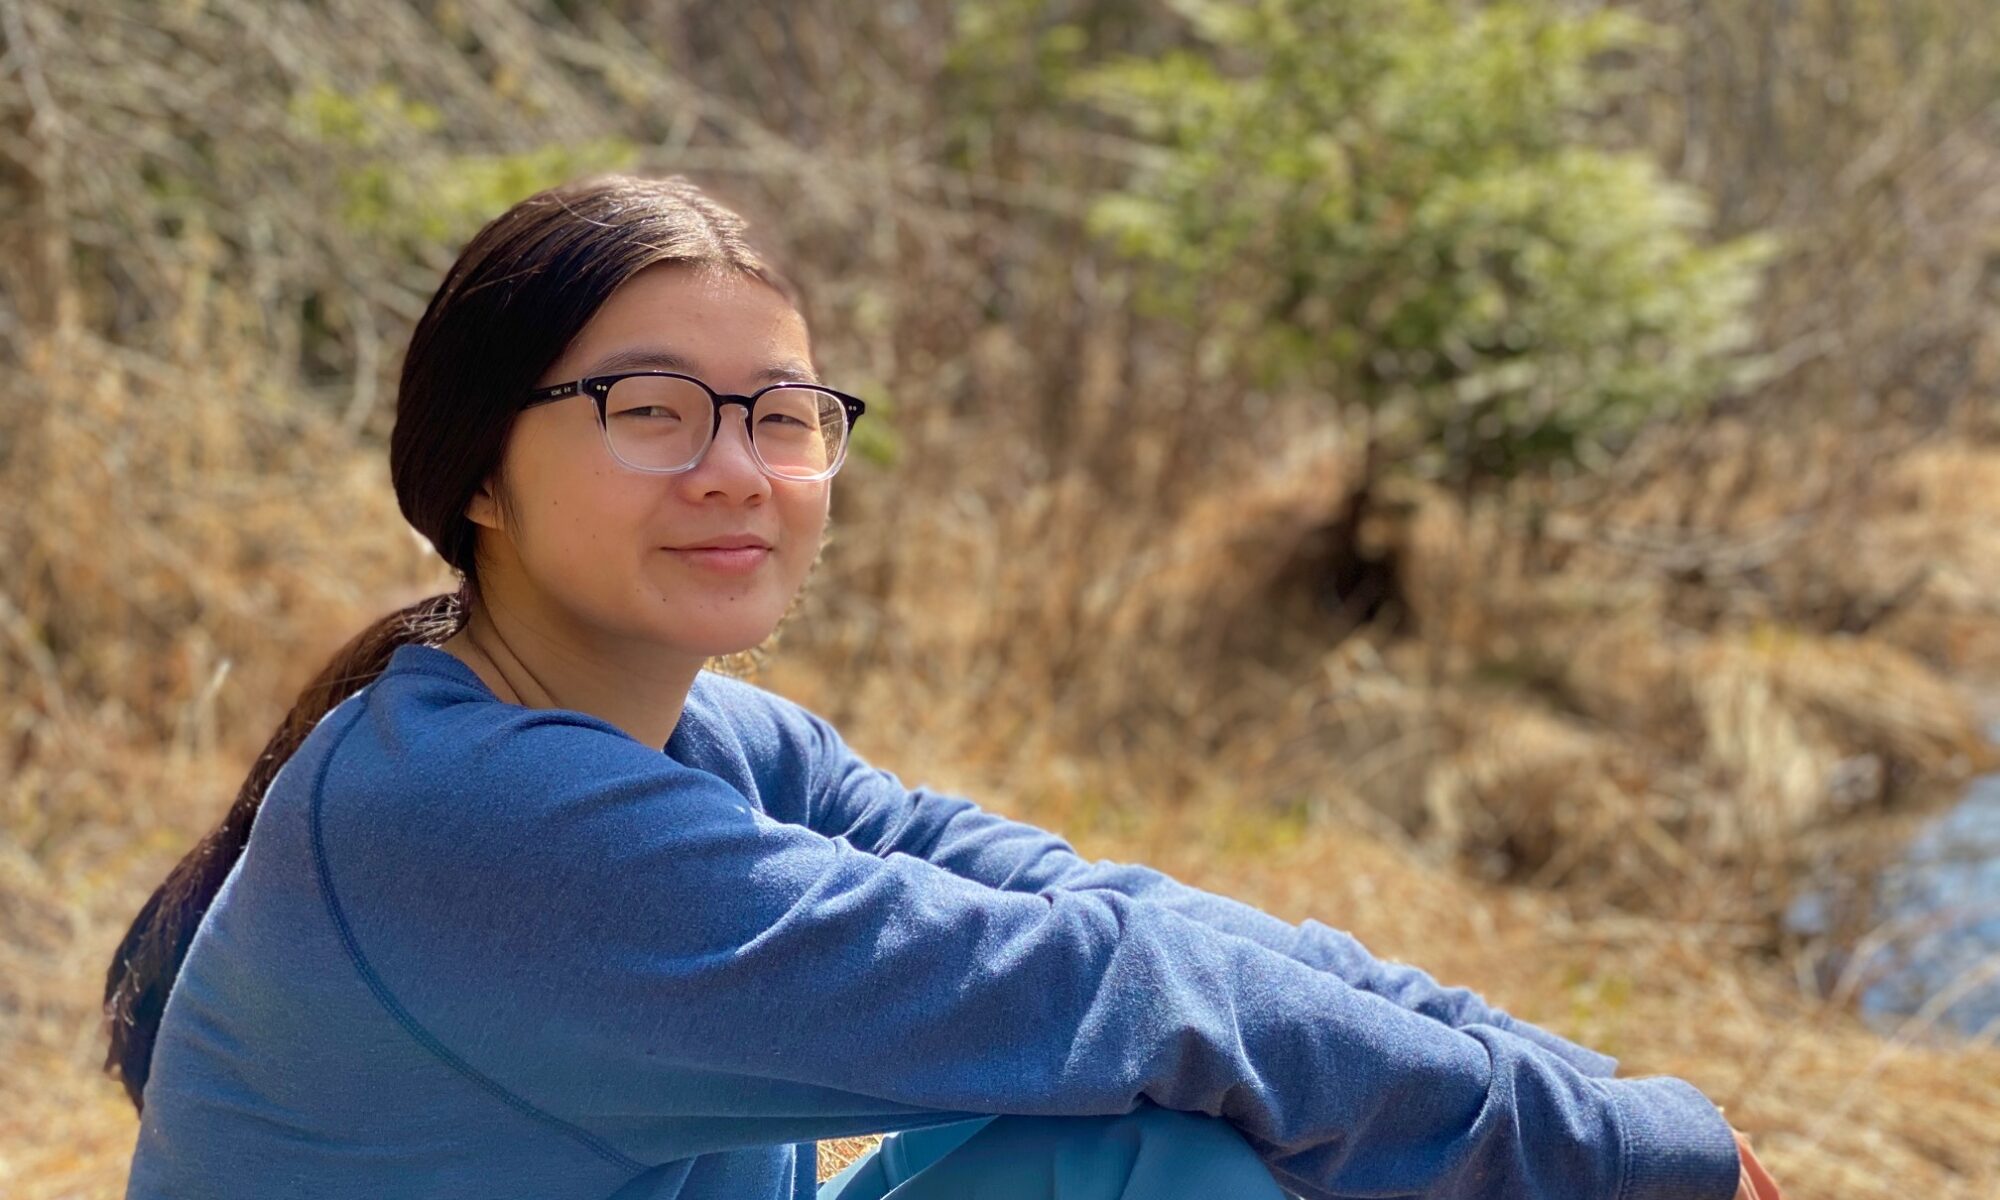 Headshot of Alyssa, a person with brown skin looking at the camera with a small grin, and sitting on the ground sideways with her knees bent, surrounded by a forested area. Alyssa has straight brown hair pulled back in a long ponytail, and she is wearing glasses and a blue long-sleeved top and pants.